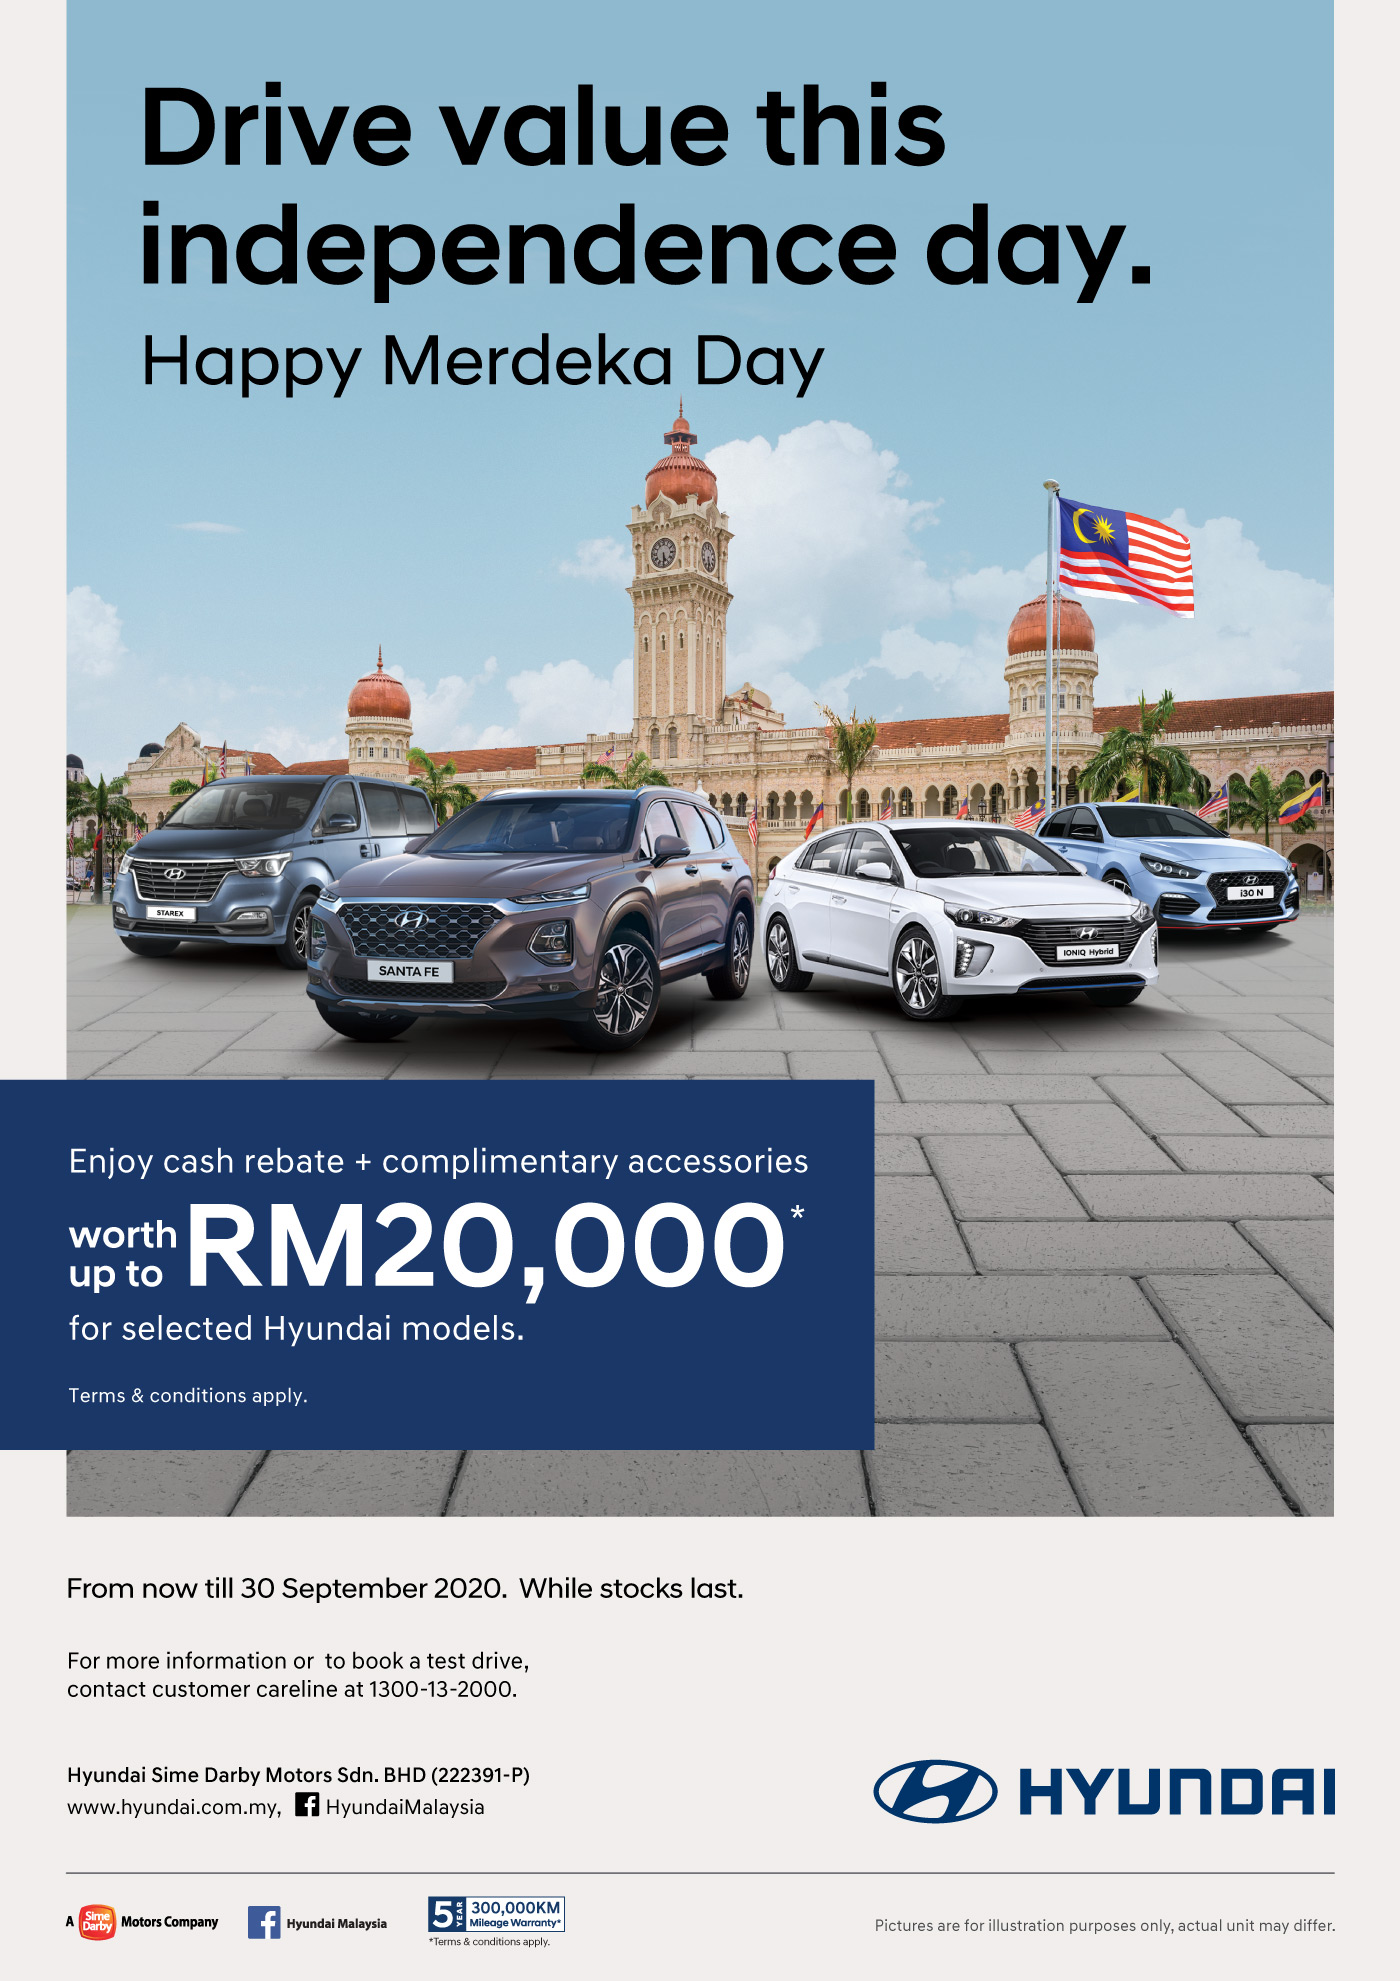 Drive value this independence day. Happy Merdeka Day. Enjoy cash rebate + complimentary accessories worth up to RM20,000* for selected Hyundai Models. While Stock Last | Promotion Period : From now till 30 September 2020. Terms apply.